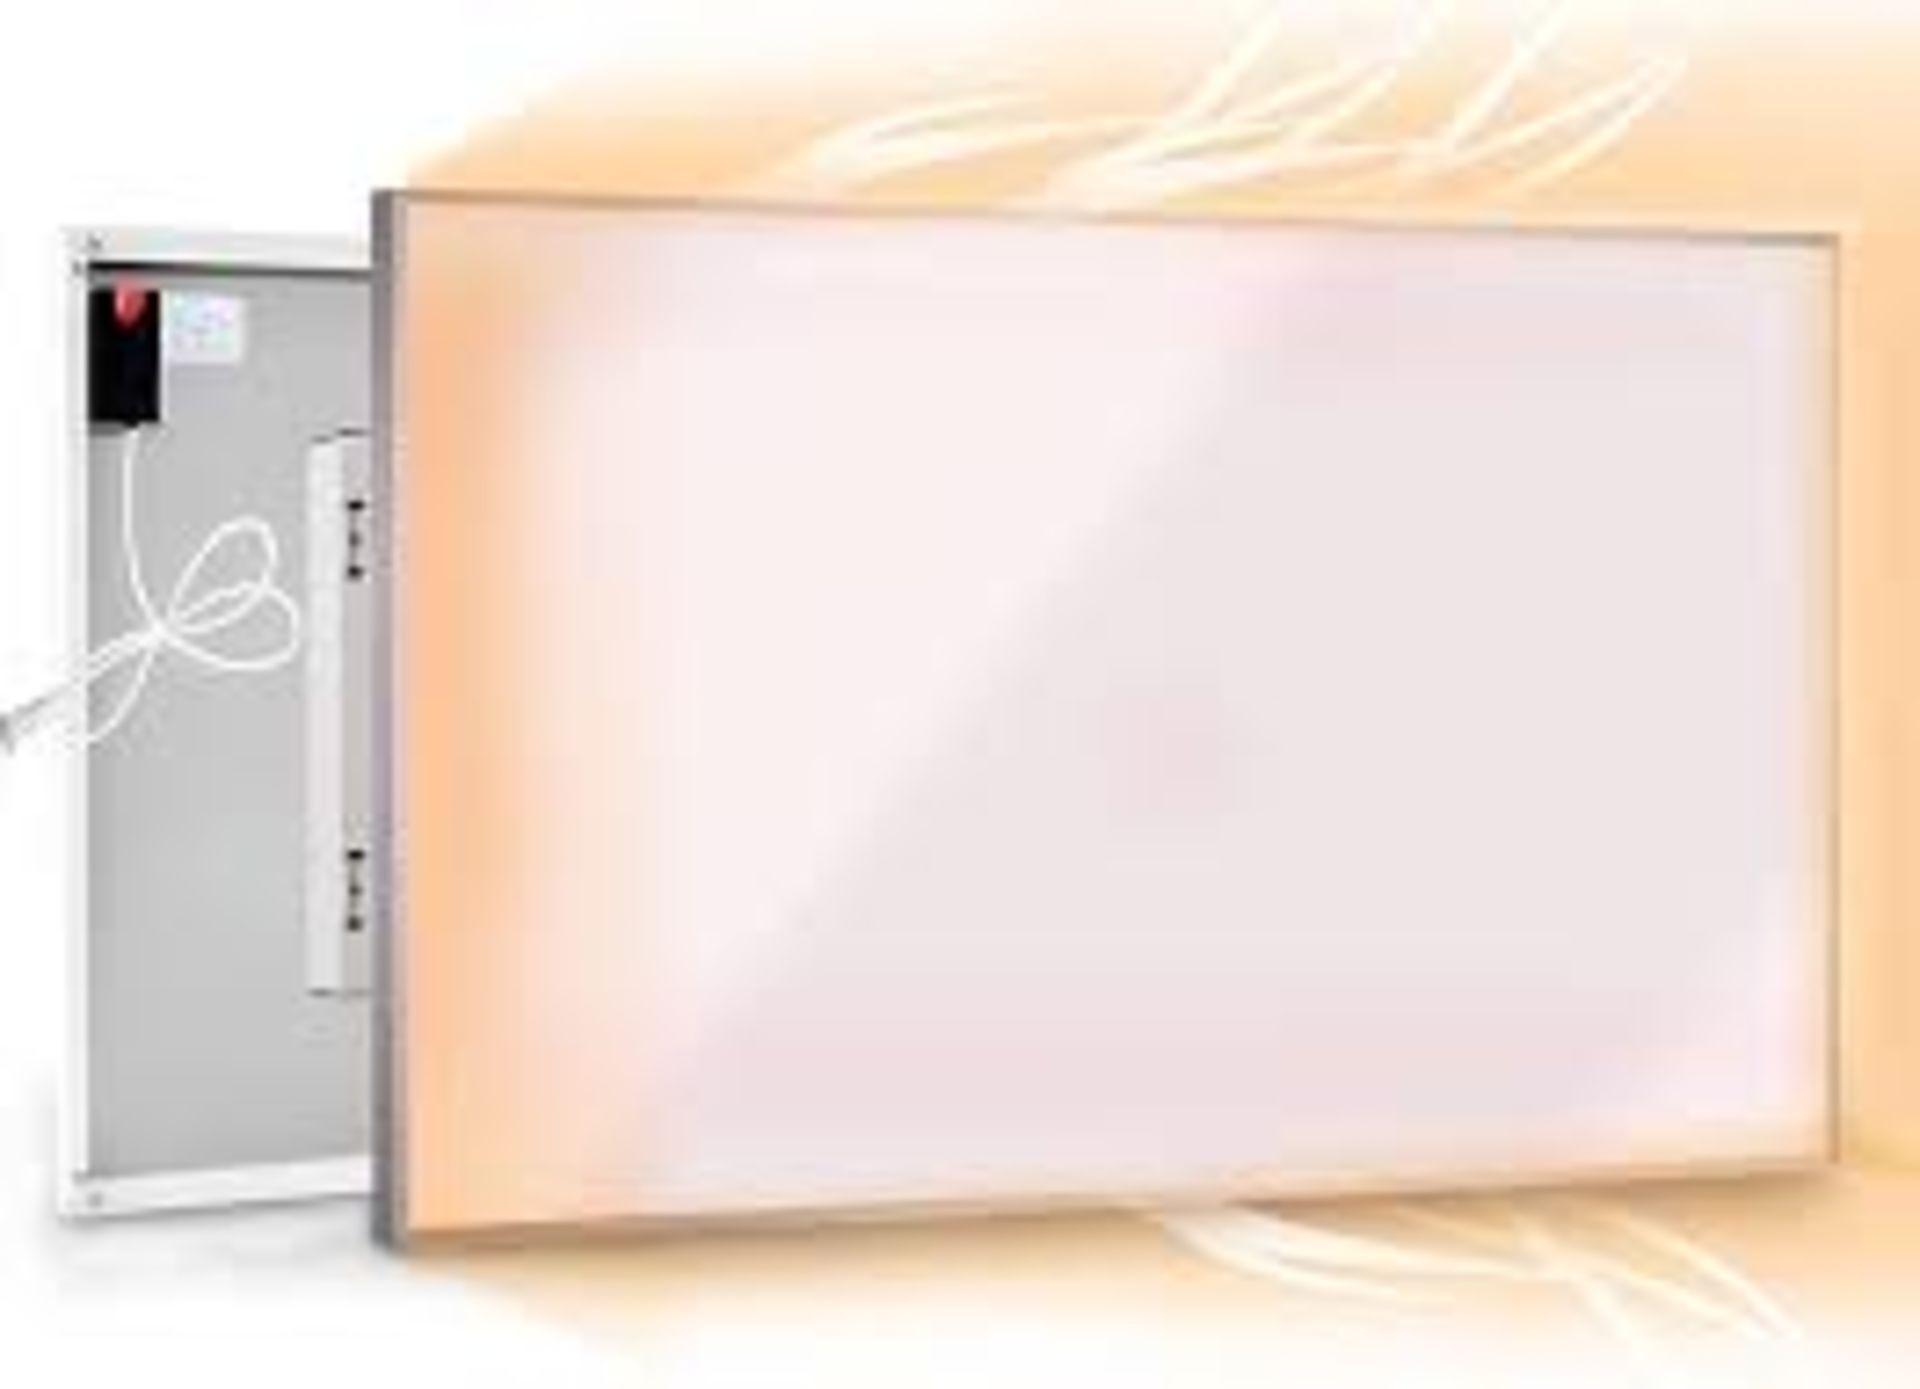 Infrared Panel Heater Electric Wall Mounted Flat Radiator Smart Heating Large UK LOCATION 13A.11